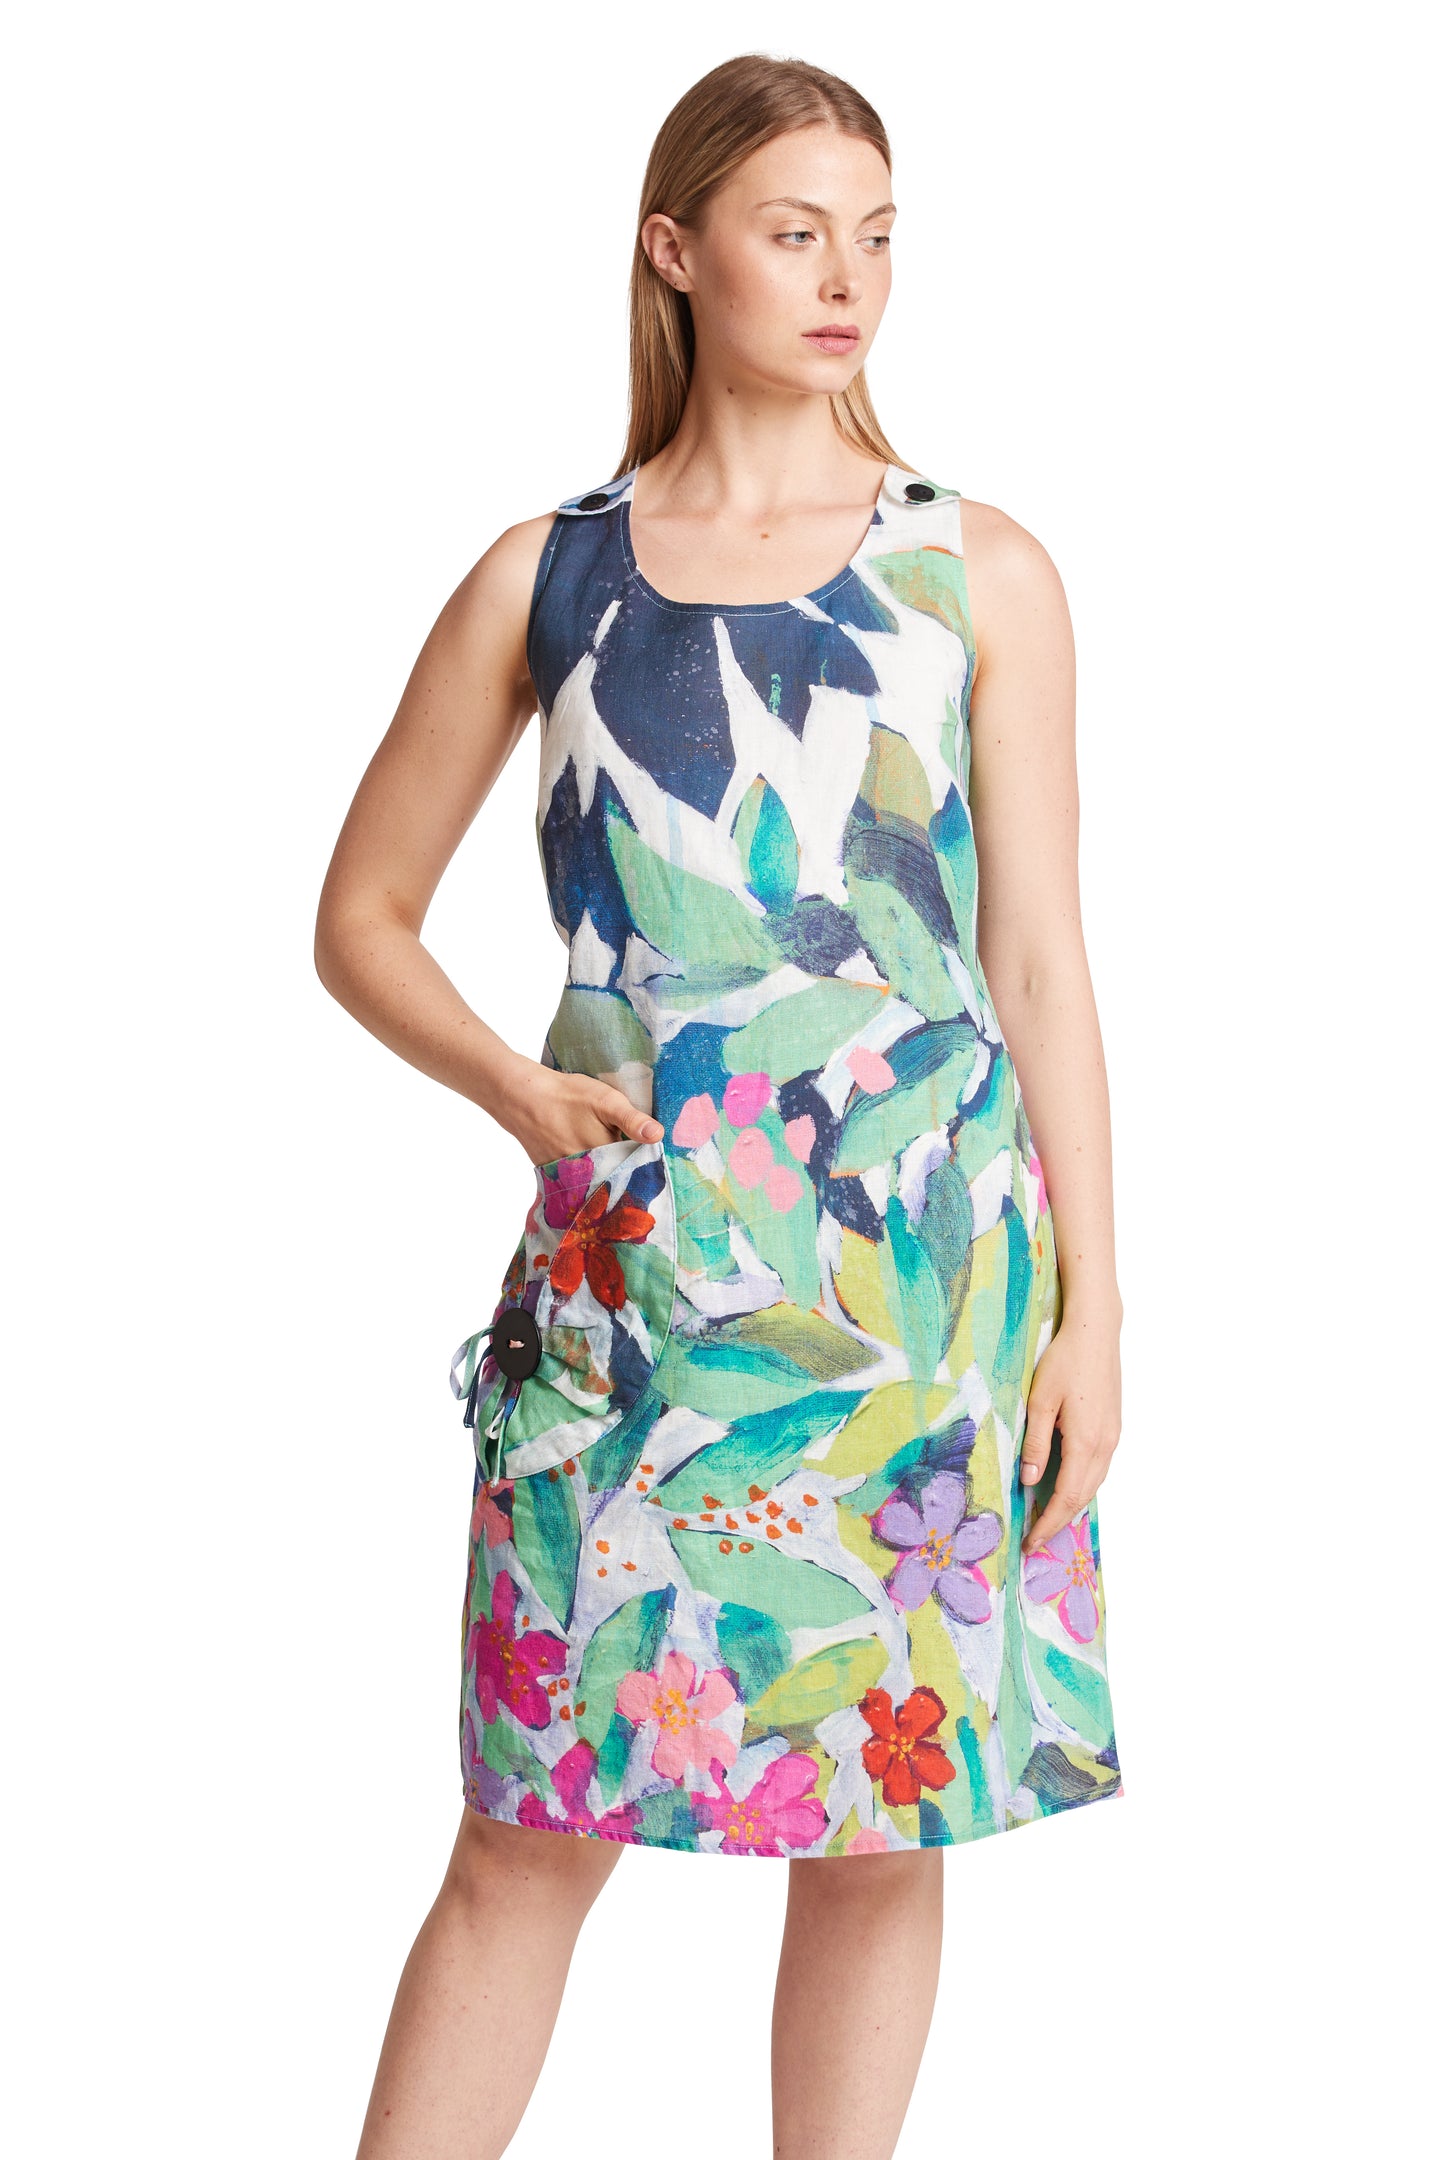 Growing In sleeveless button pocket dress